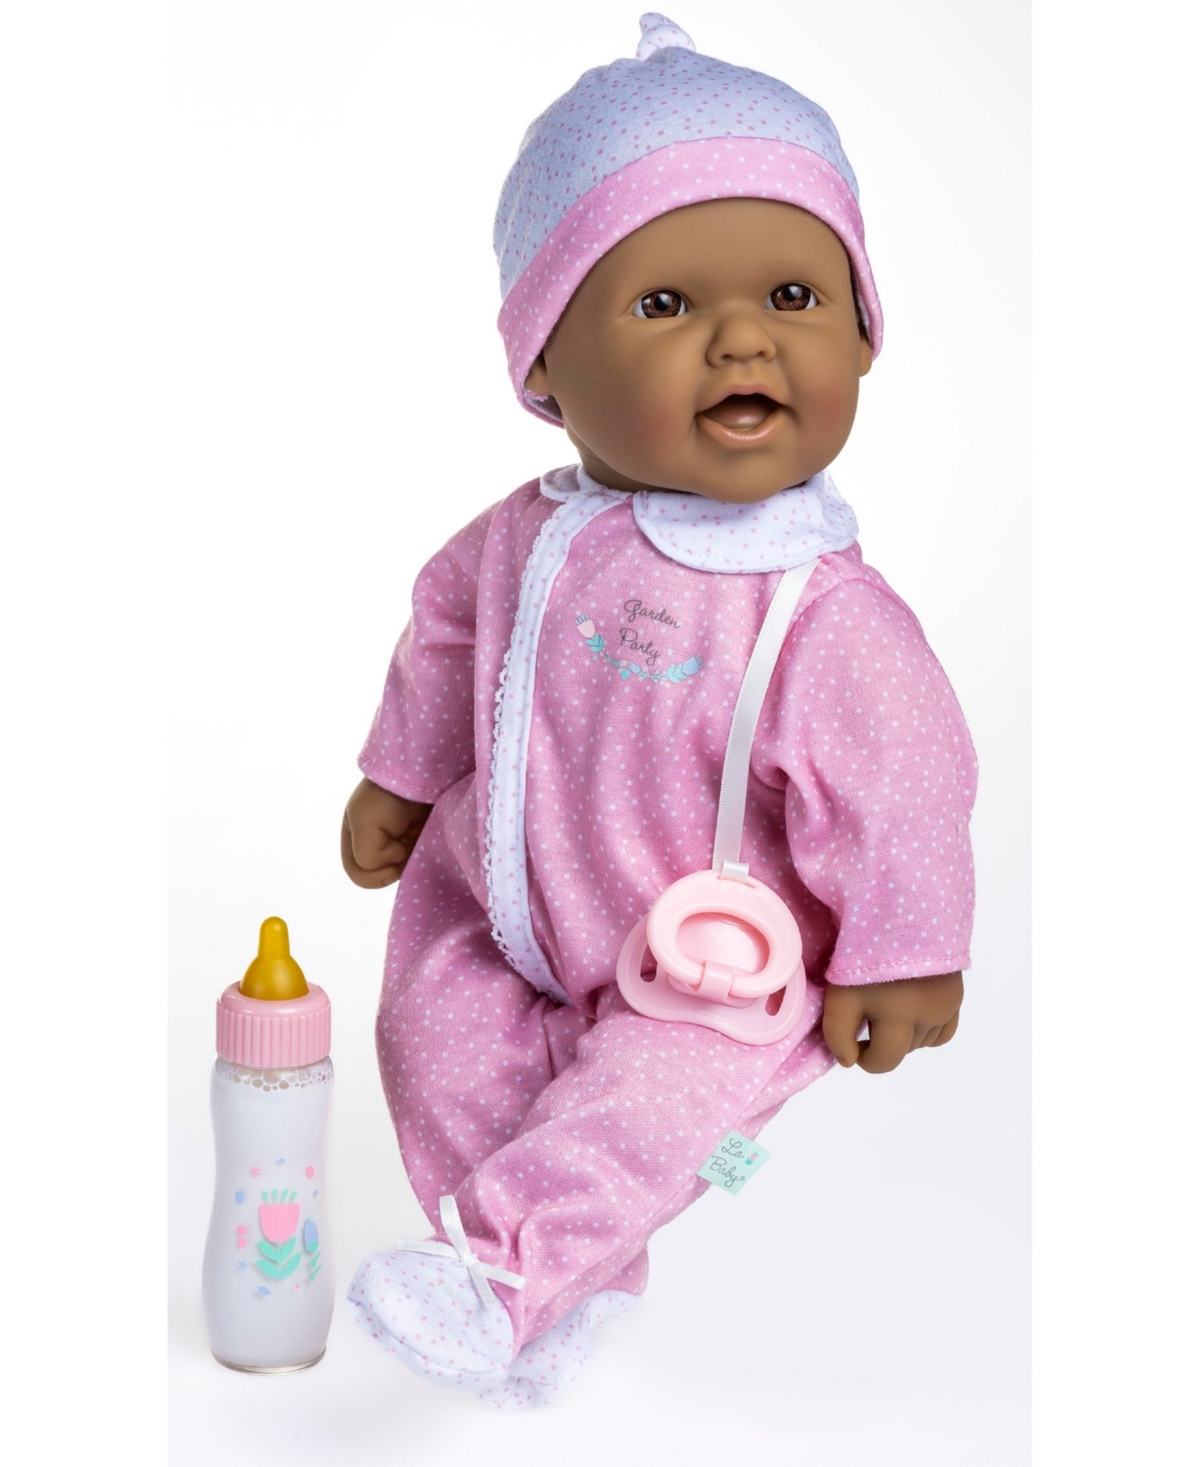 Jc Toys La Baby Hispanic 14.3" Soft Body Baby Doll Onesie With Pacifier, Magic Bottle Set In Multicolor